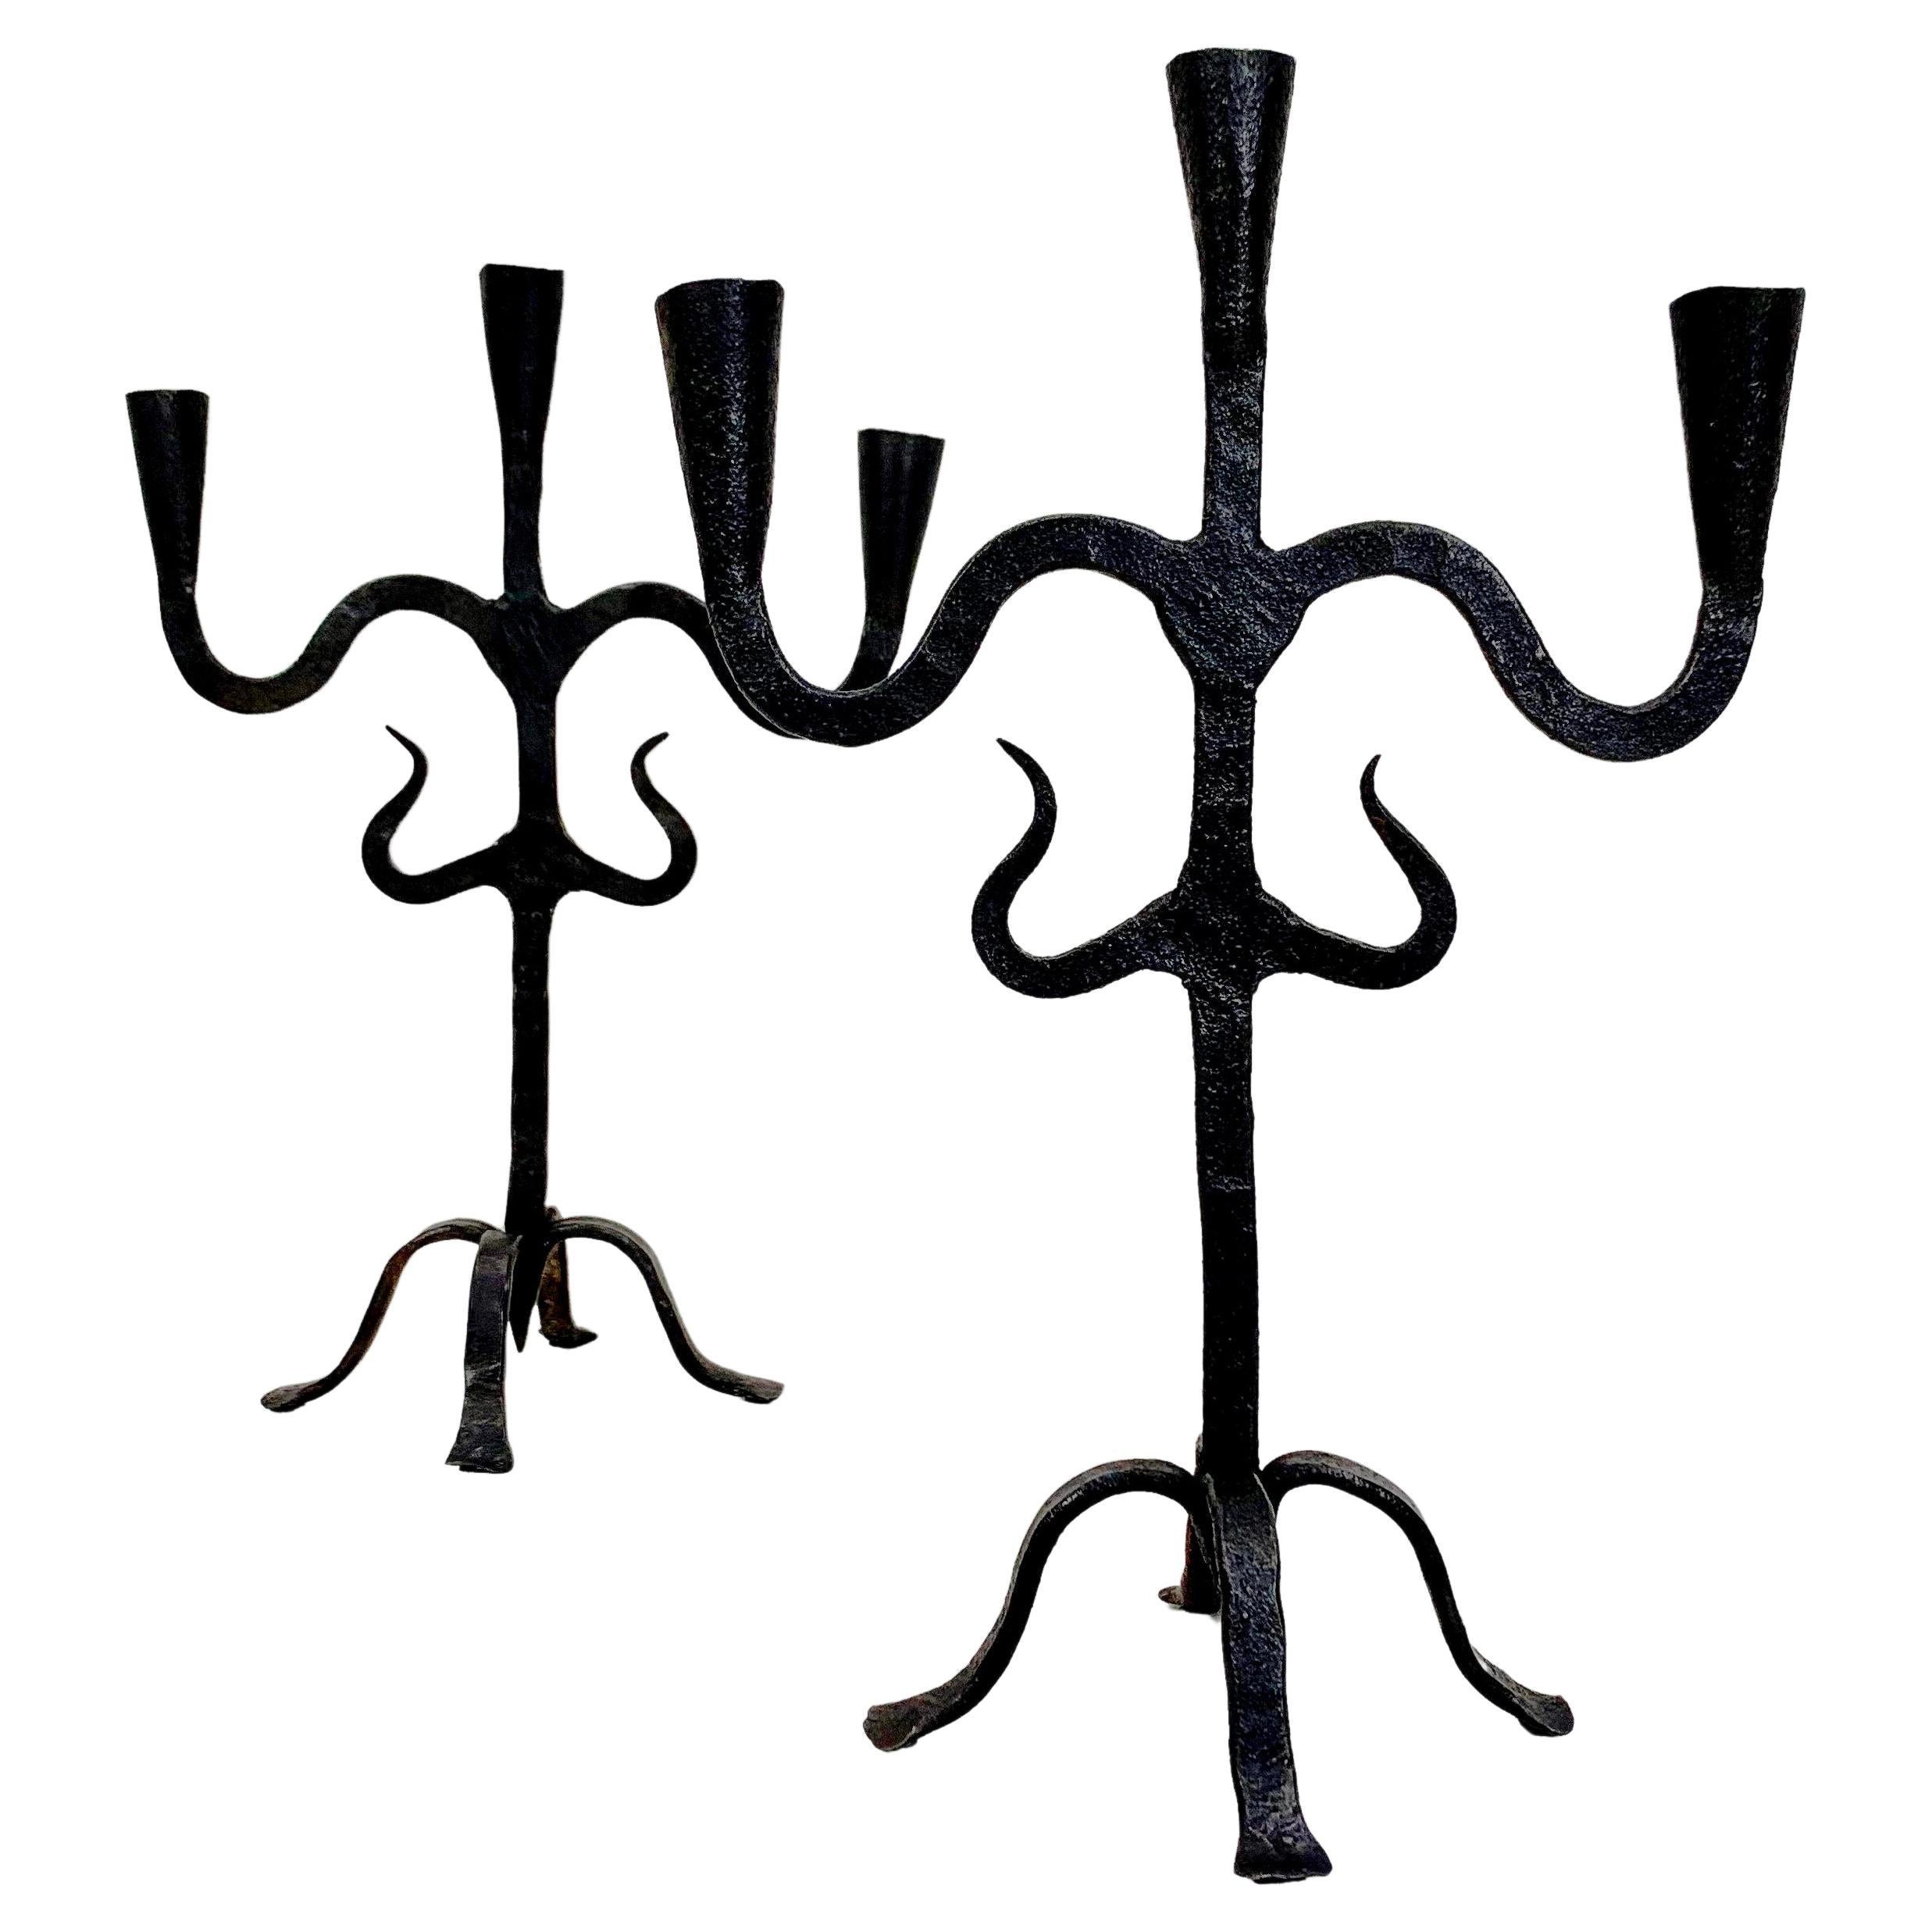 Mid-century decorative pair of candlesticks
Les Artisans de Marolles era circa 1950, France.
Blackened wrought iron.
Dimensions: 37 cm H, 26 cm W, 16 cm D.
Good original condition.
All purchases are covered by our Buyer Protection Guarantee.
This